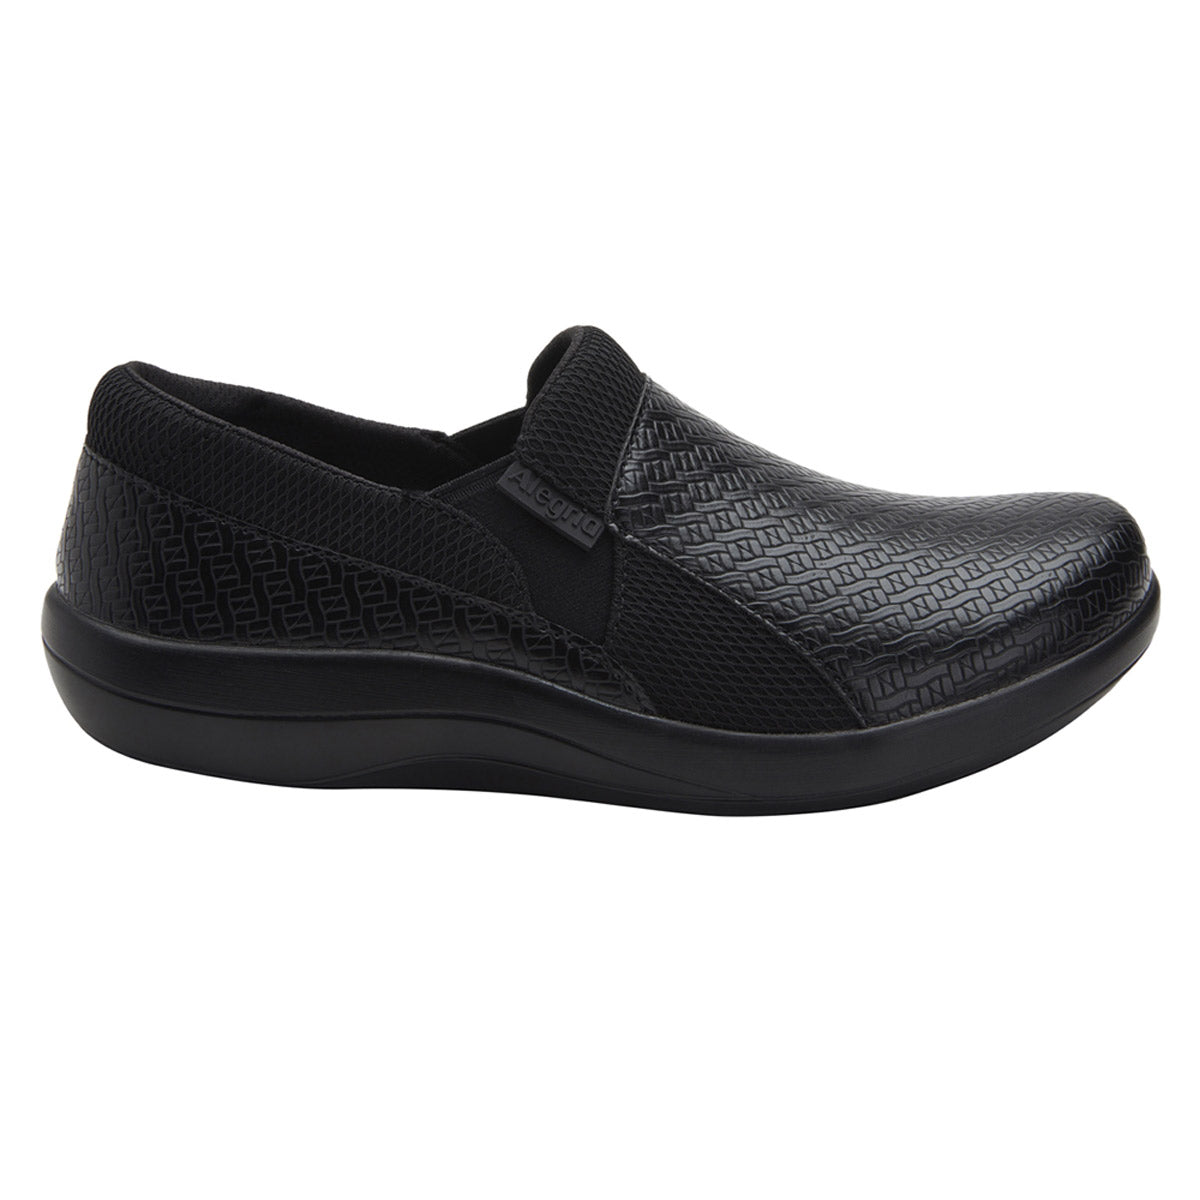 A black nursing shoe featuring a textured, woven upper and a smooth, cushioned sole with enhanced shock absorption and a slip-resistant outsole is the ALEGRIA DUETTE BLACK WOVEN - WOMENS by Alegria.